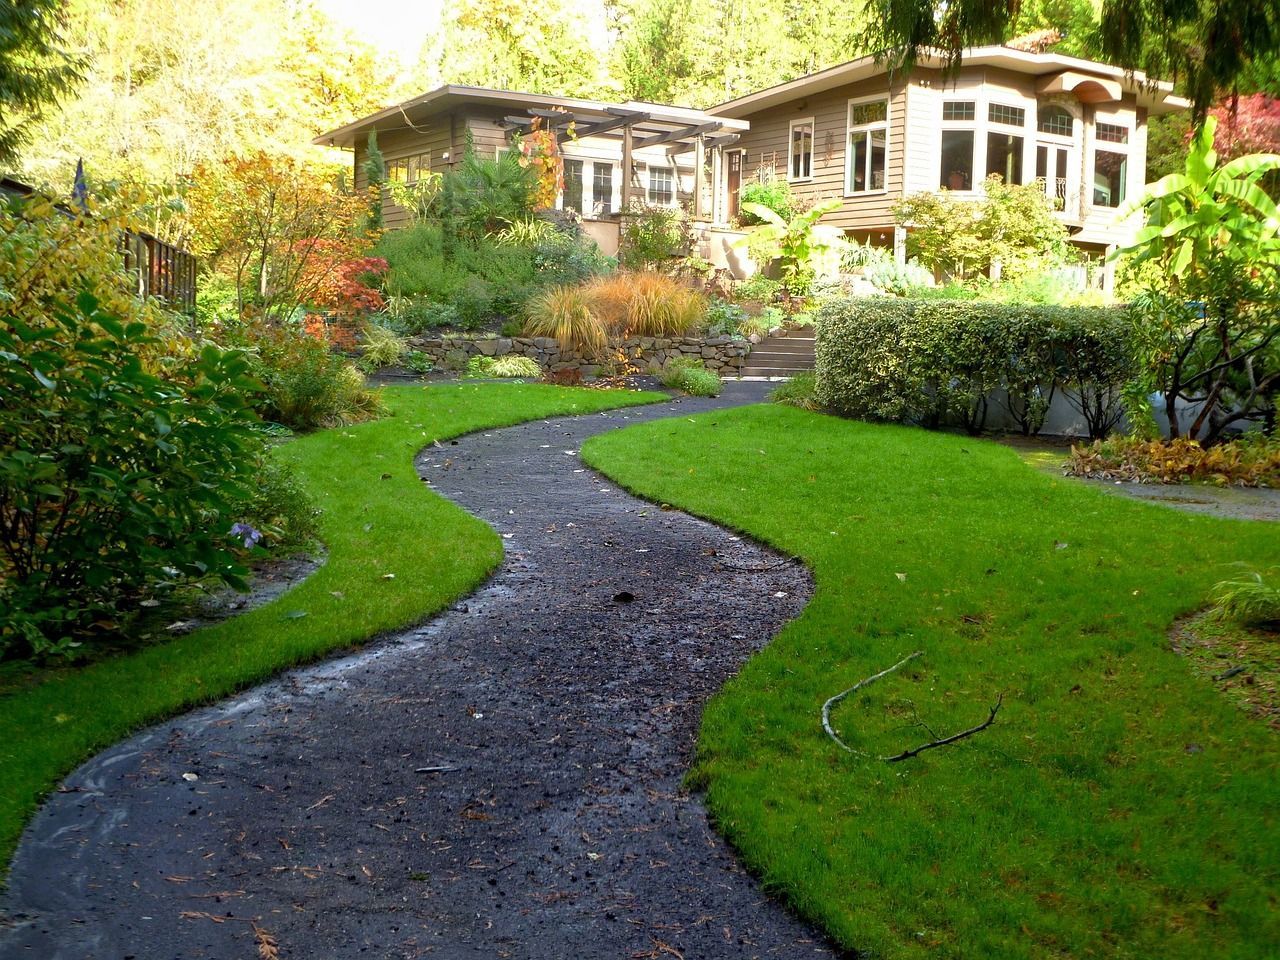 a path leading to a house in a lush green garden